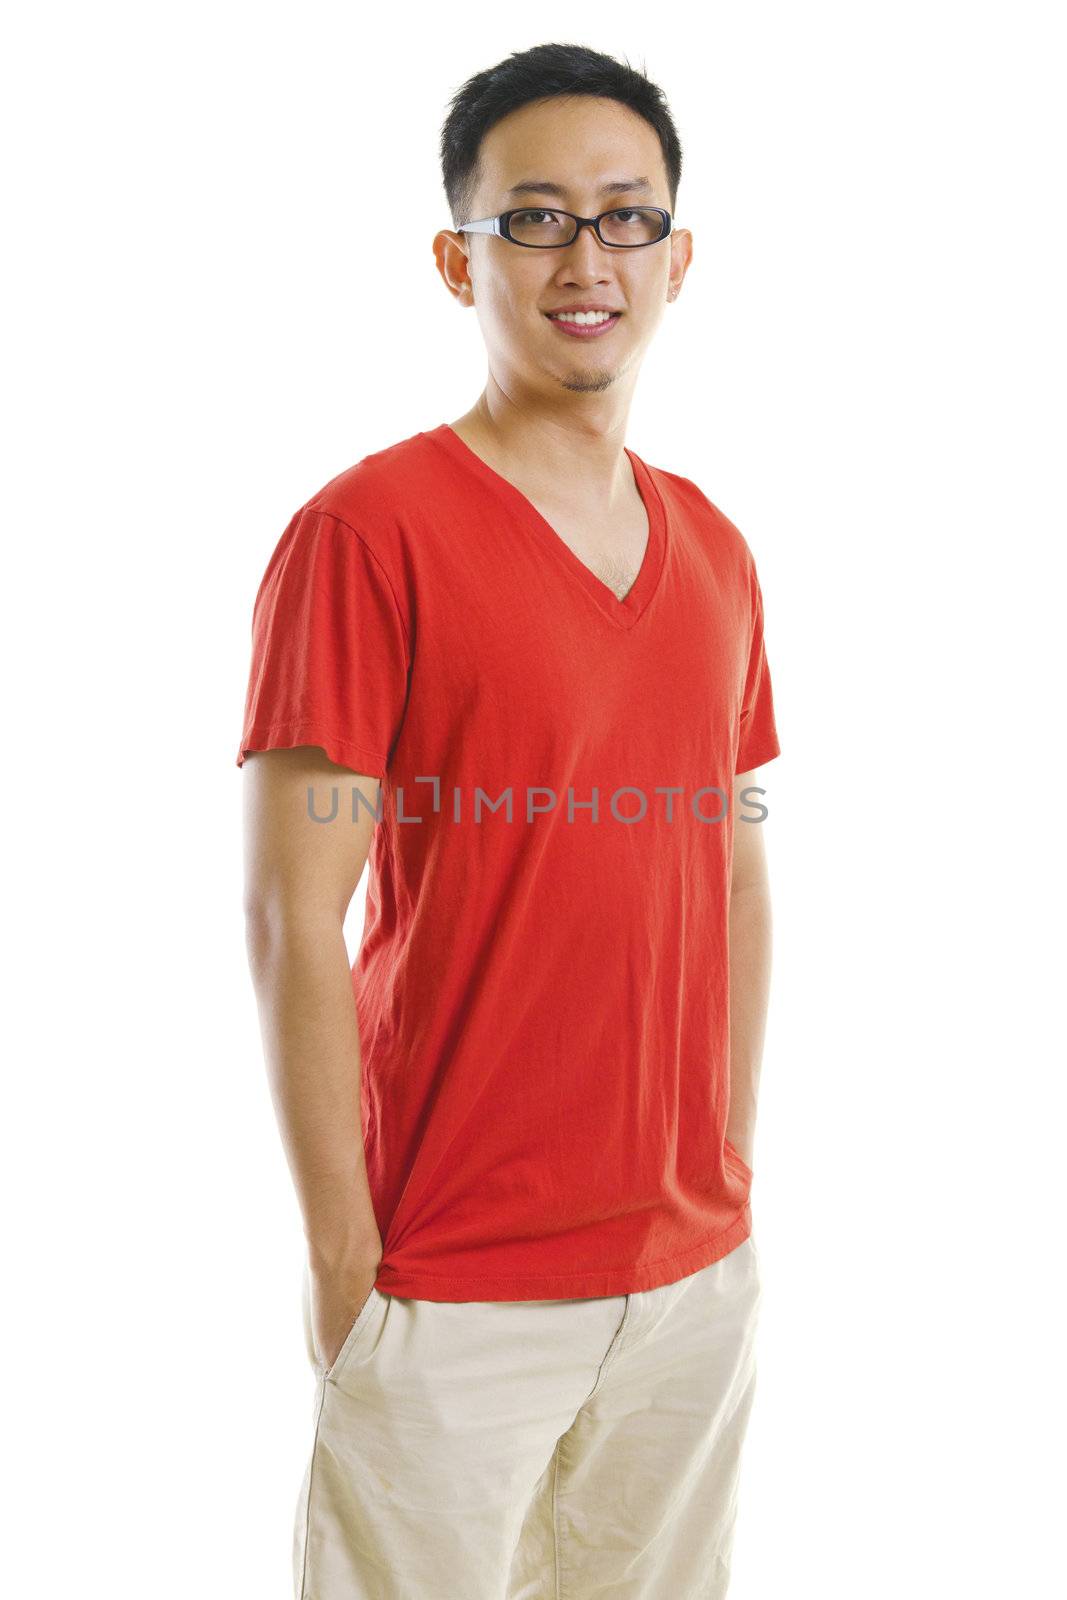 30s Asian male standing on white background